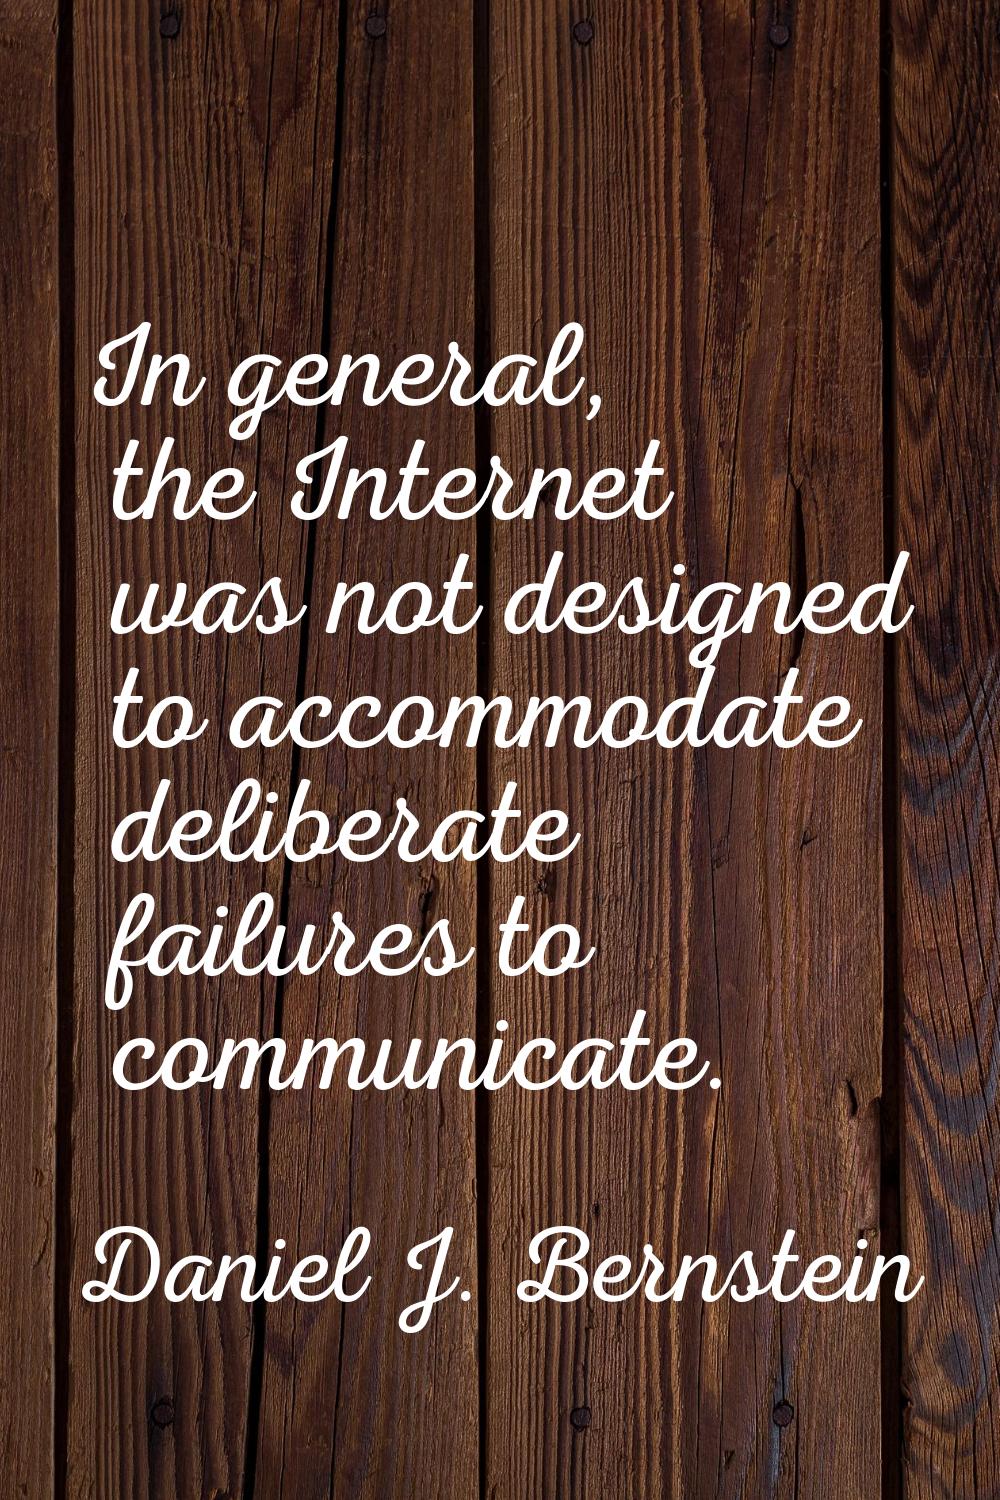 In general, the Internet was not designed to accommodate deliberate failures to communicate.